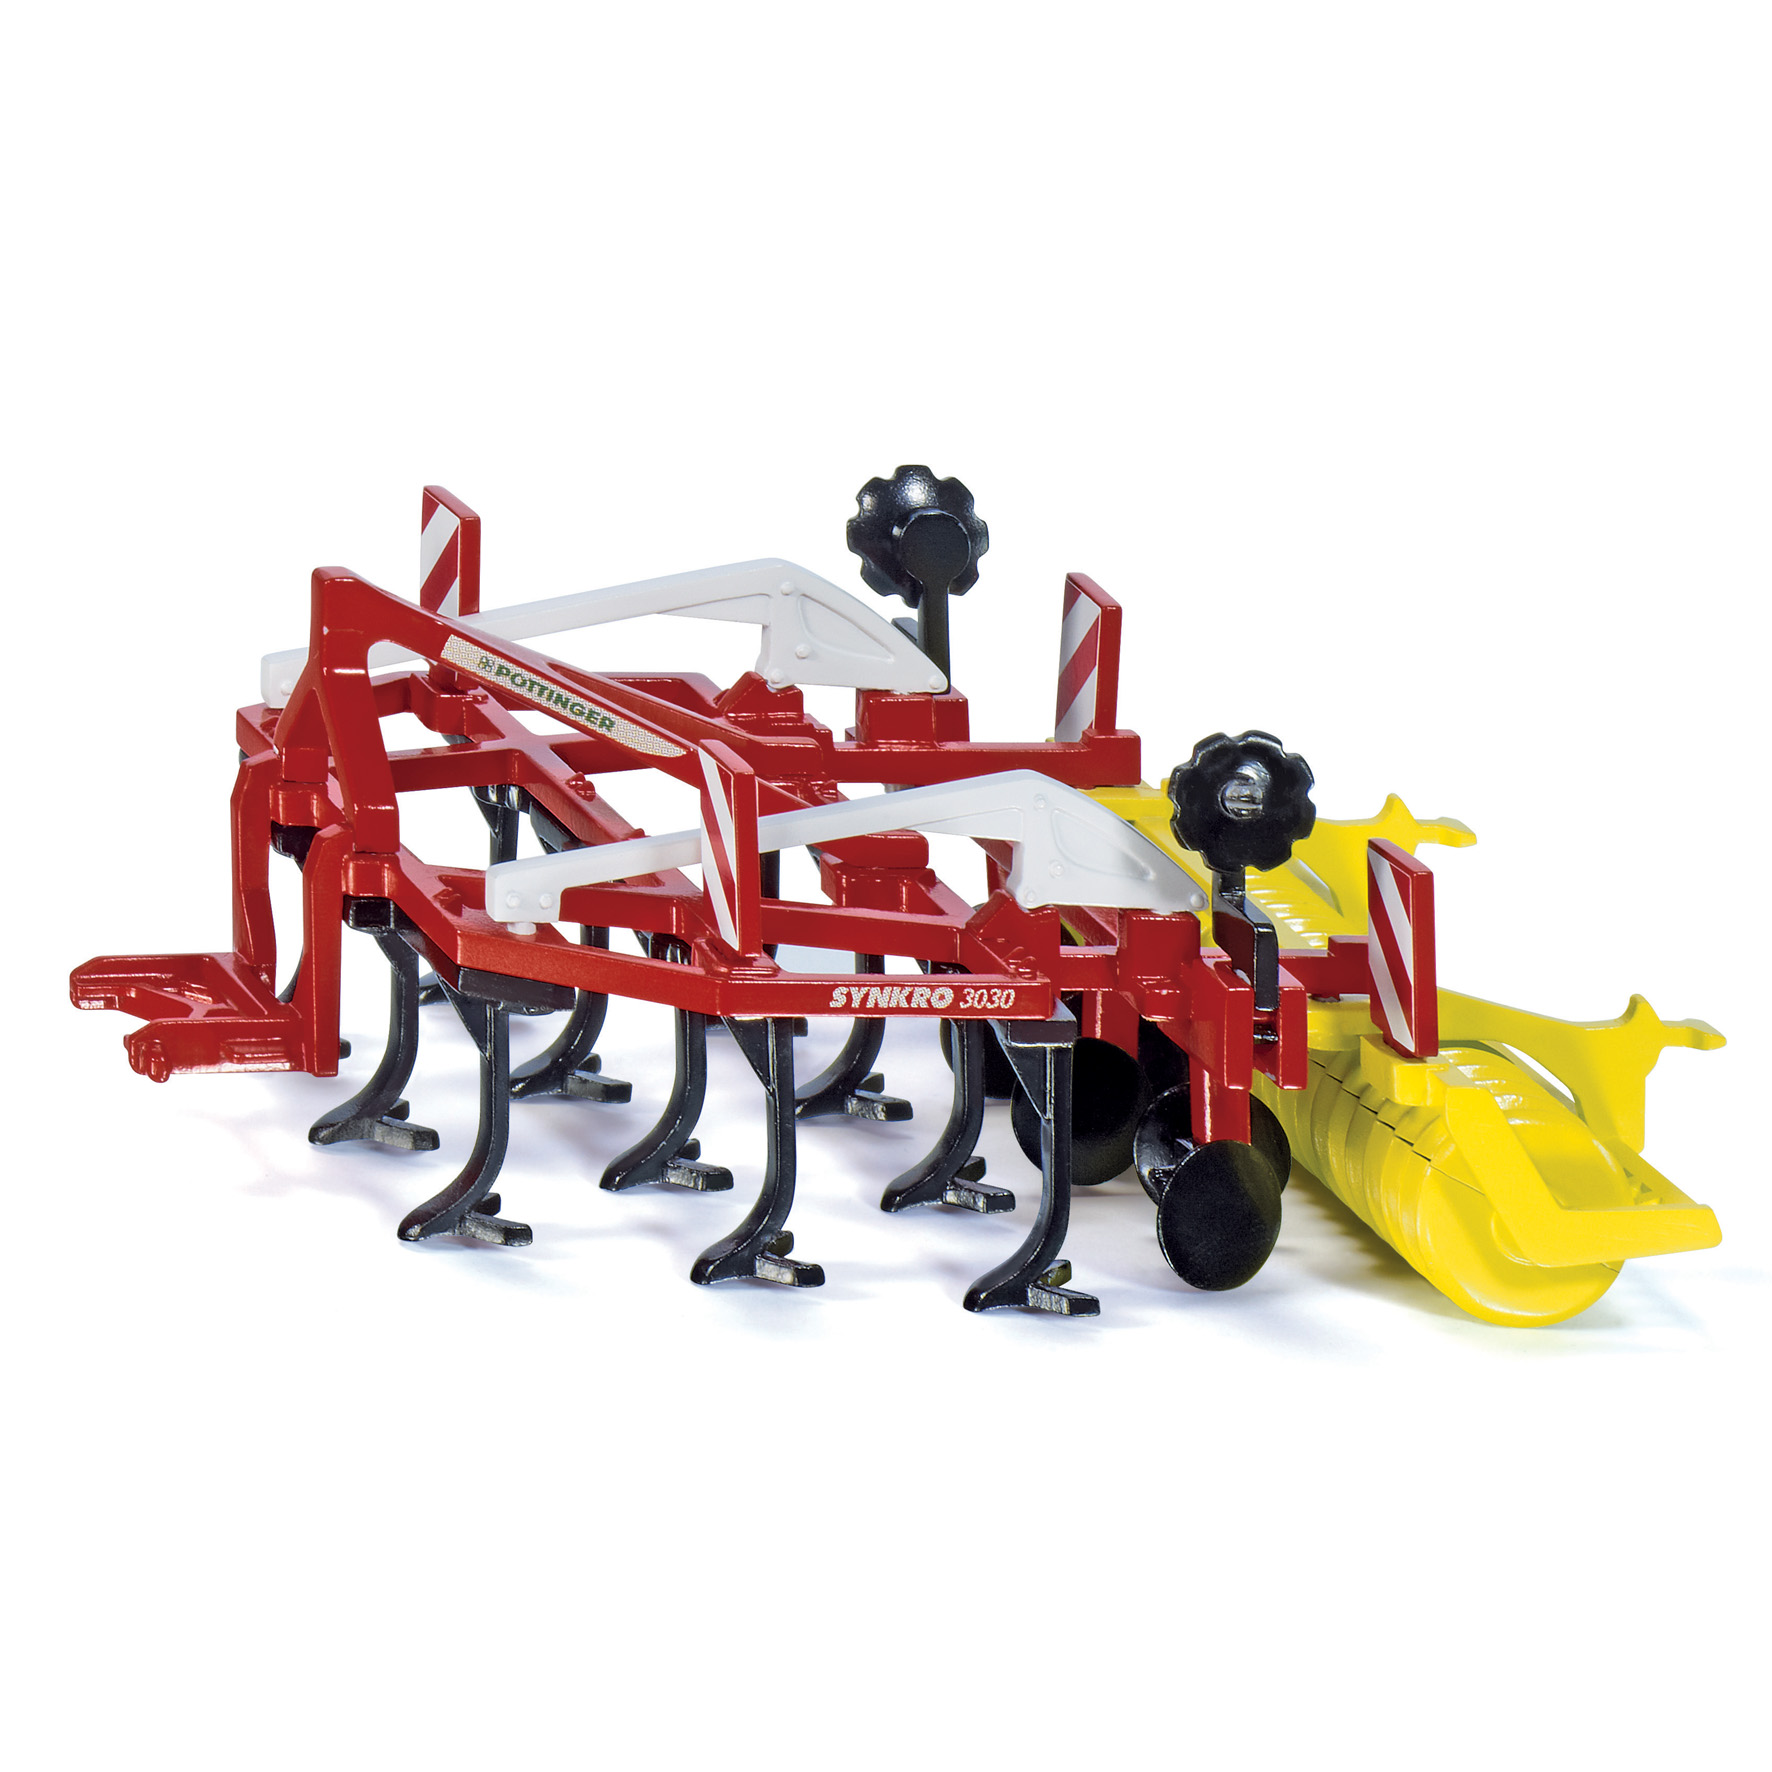 Tractors & Agricultural Vehicles cultivator 1:32